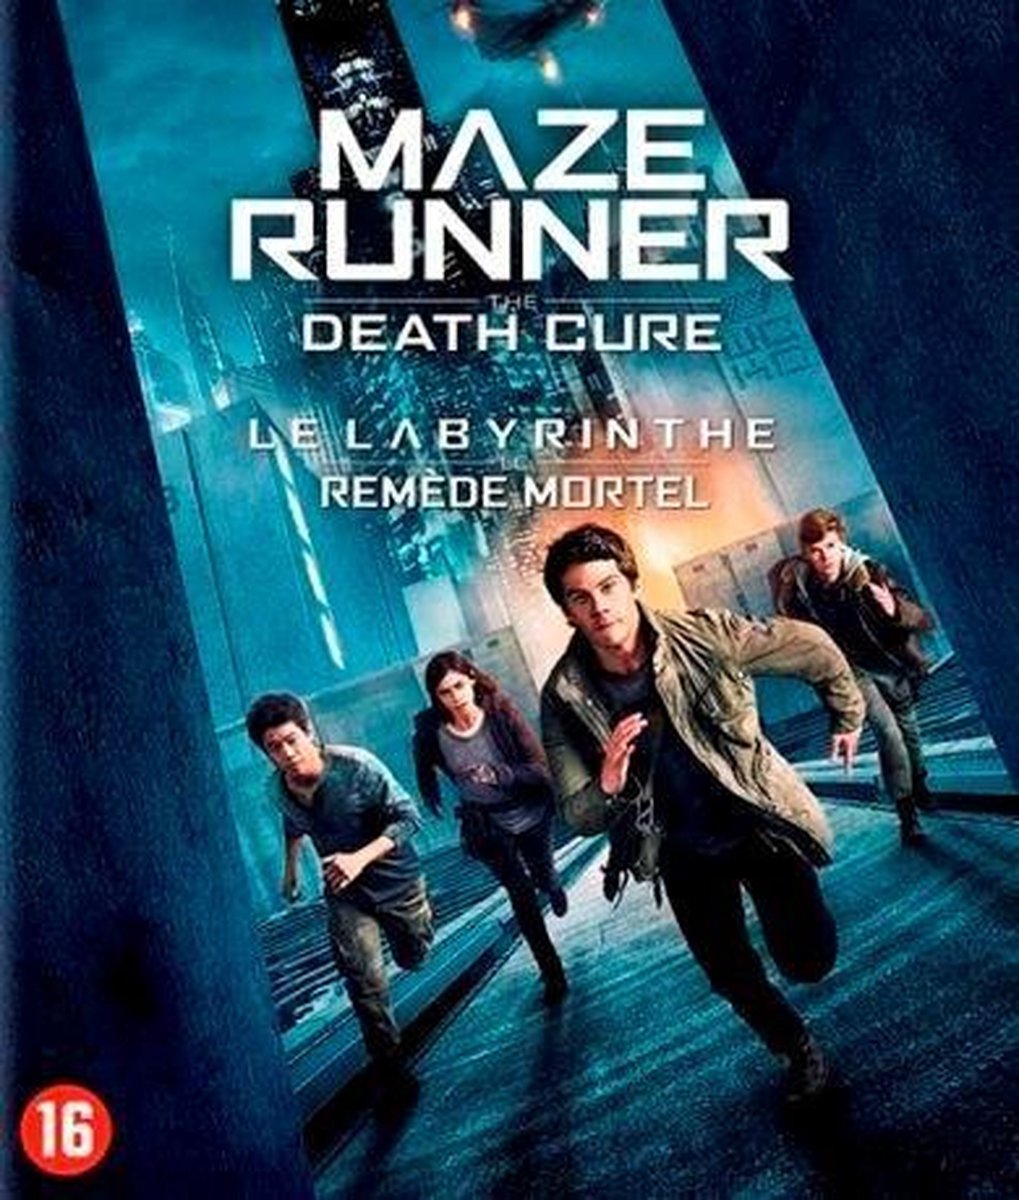 Maze Runner - The Death Cure (Blu-ray) - Disney Movies